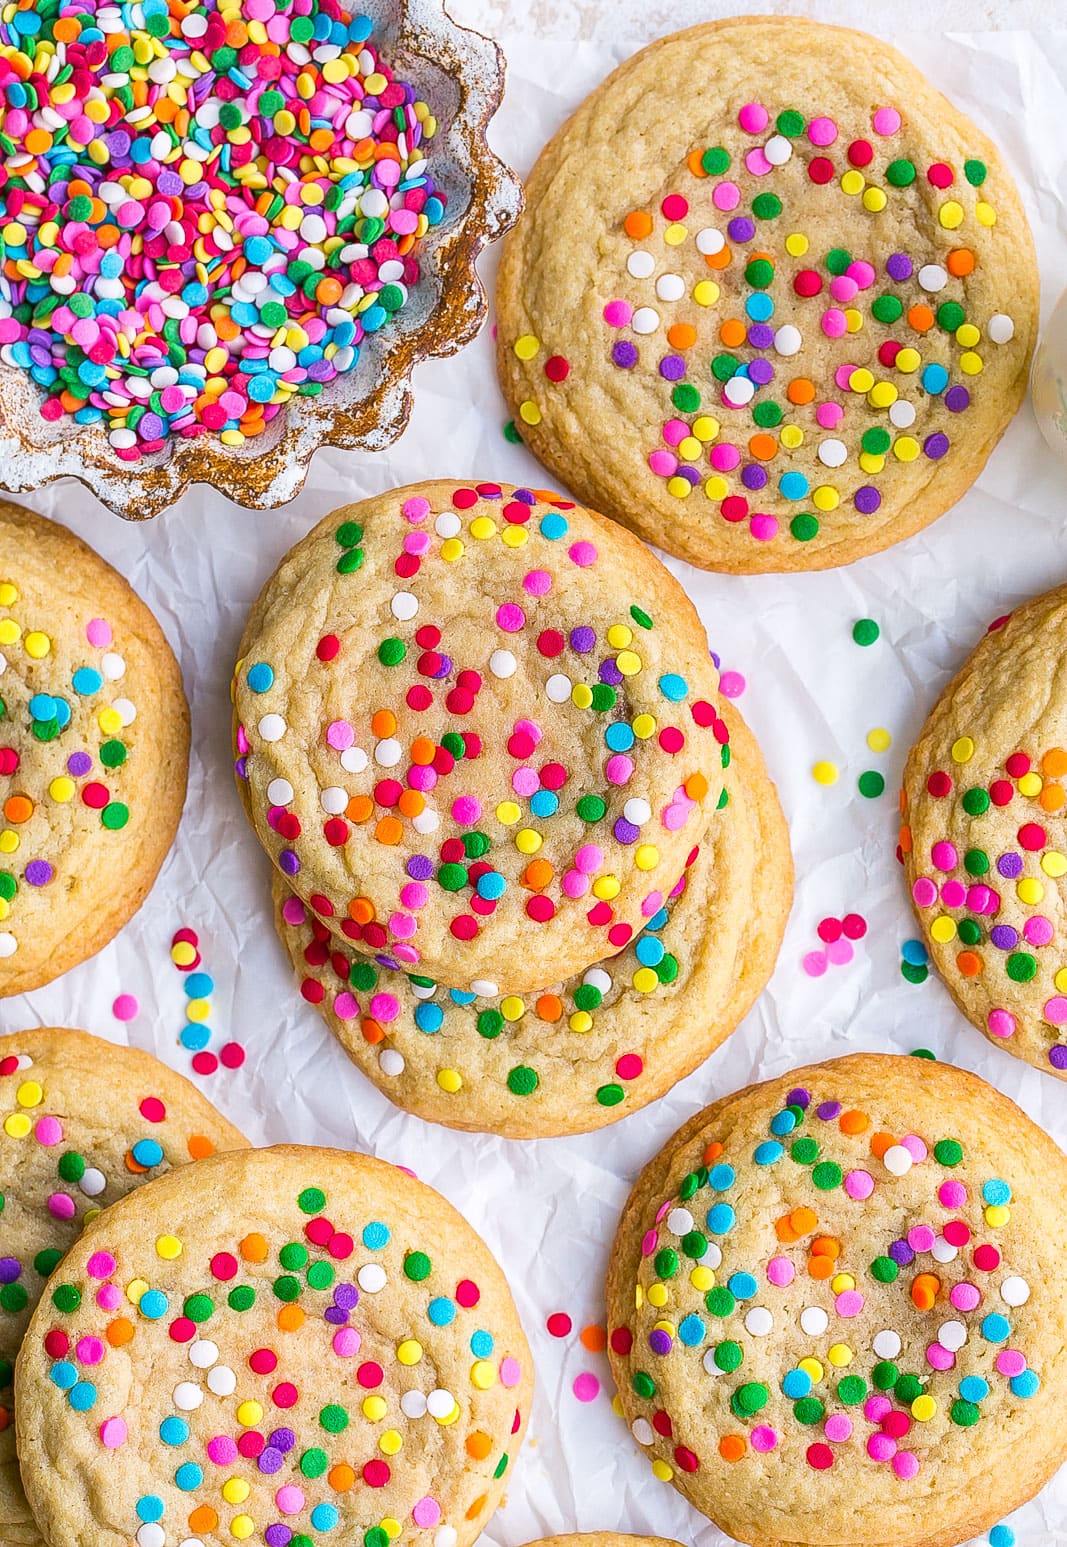 Giant sugar cookie recipe with sprinkles.